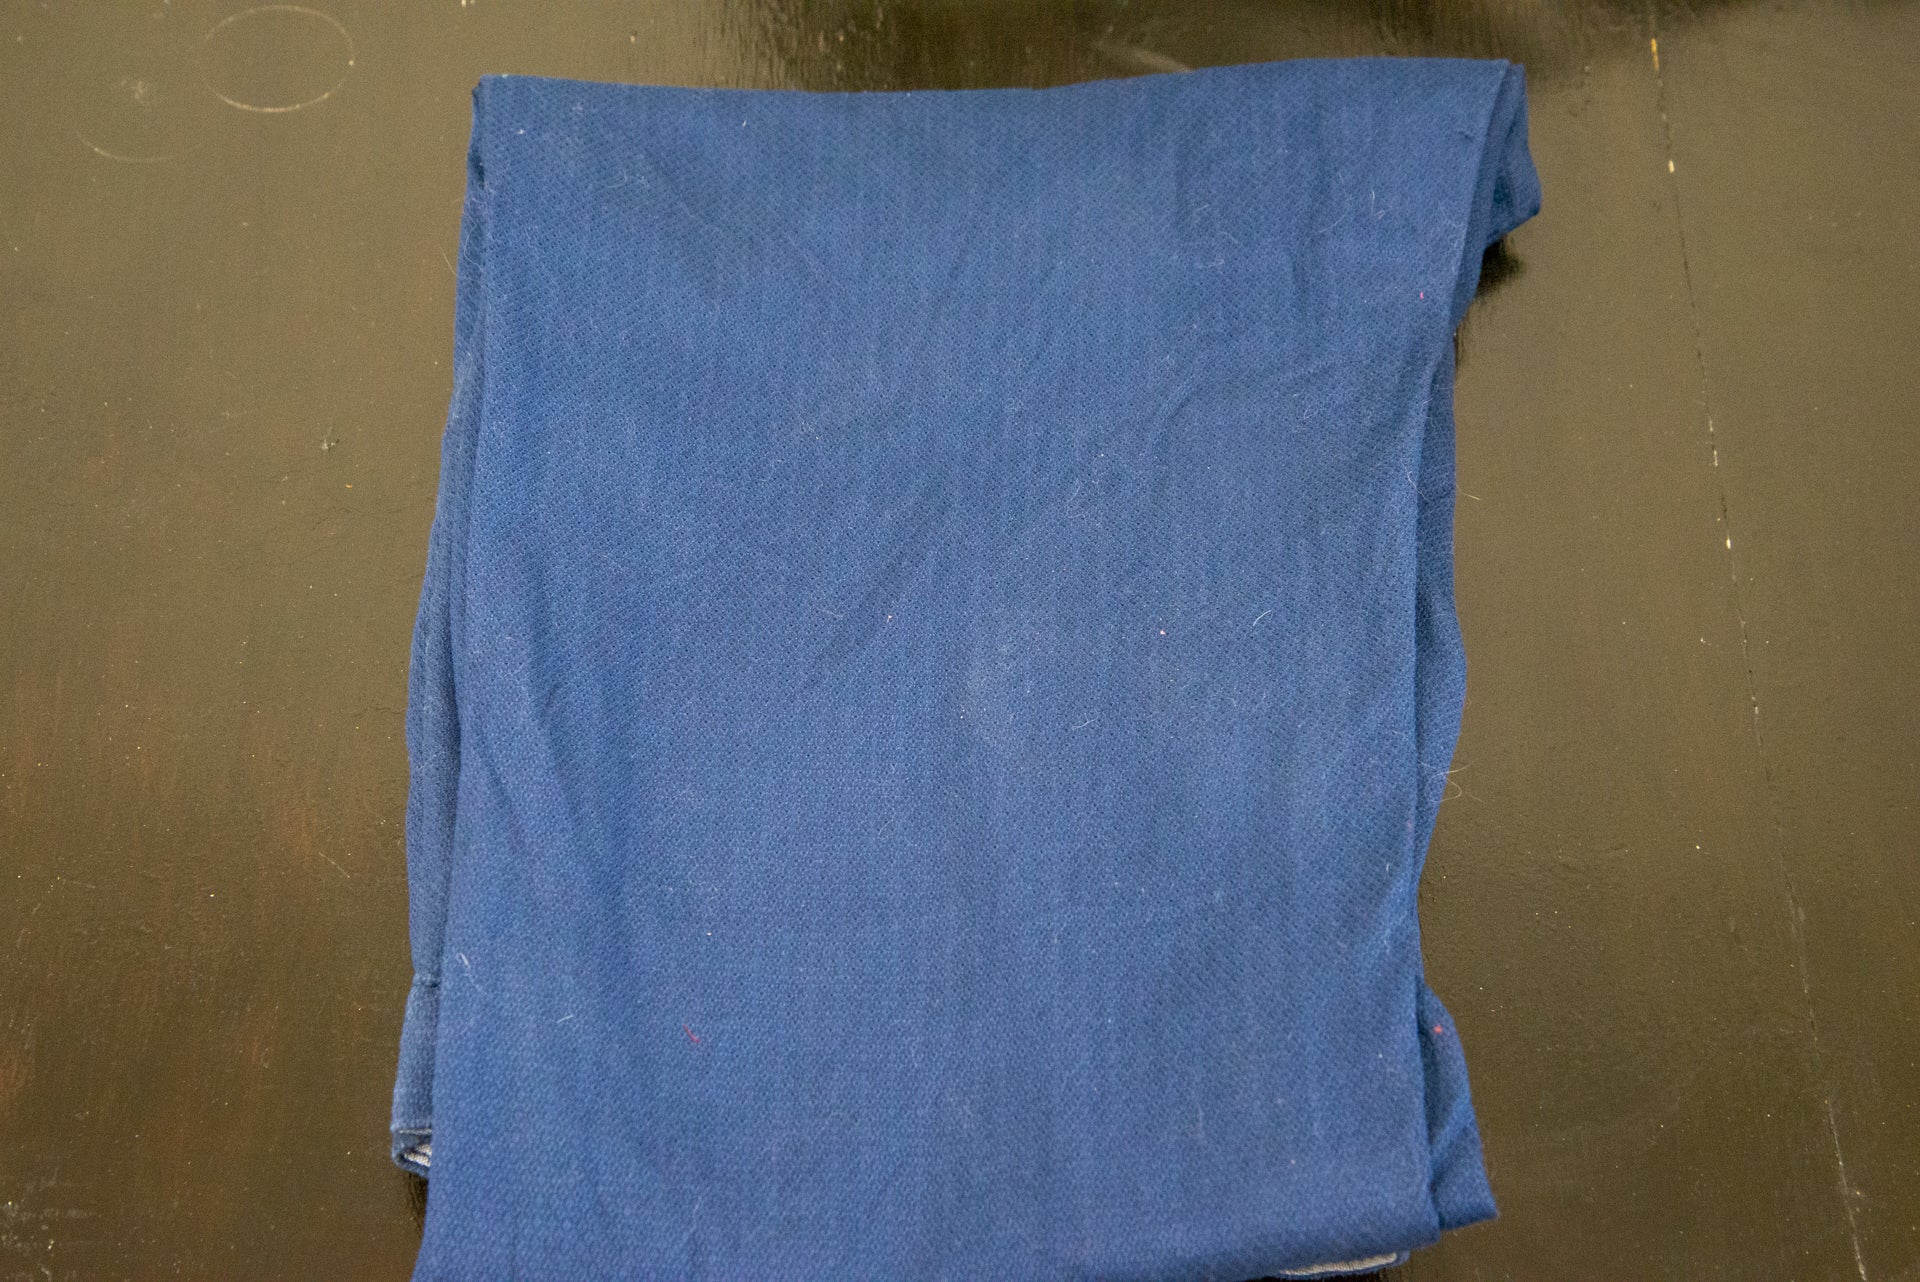 A blue cloth kept on a wooden table